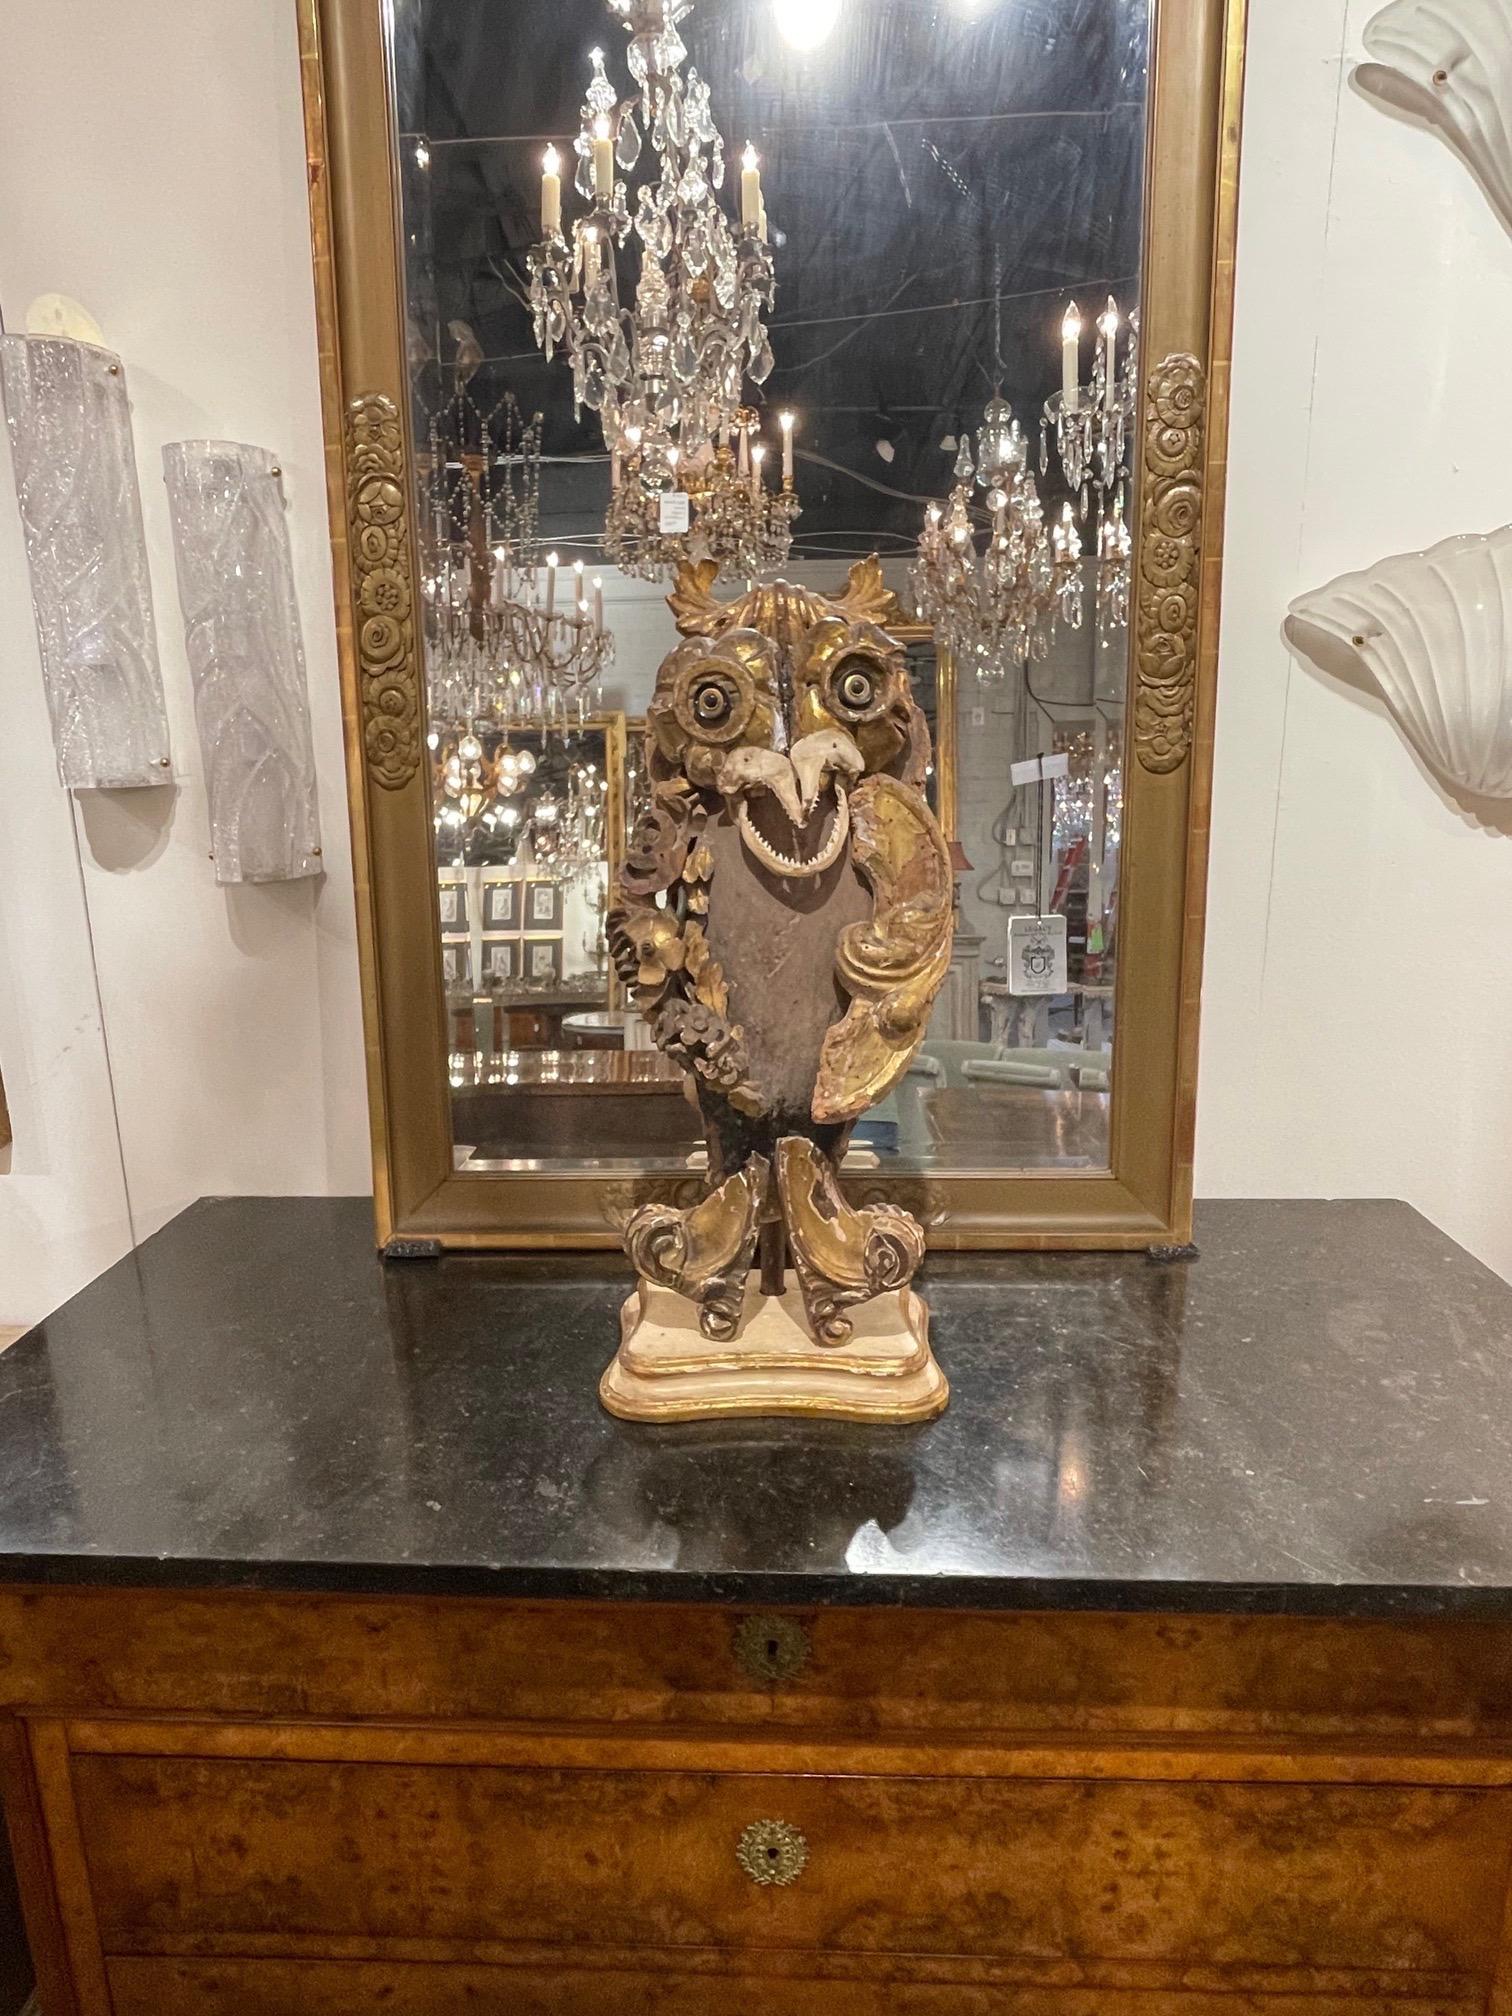 18th century Italian sculpture of an owl made of fragments including a sharks jaw. So interesting. A real conversation piece!